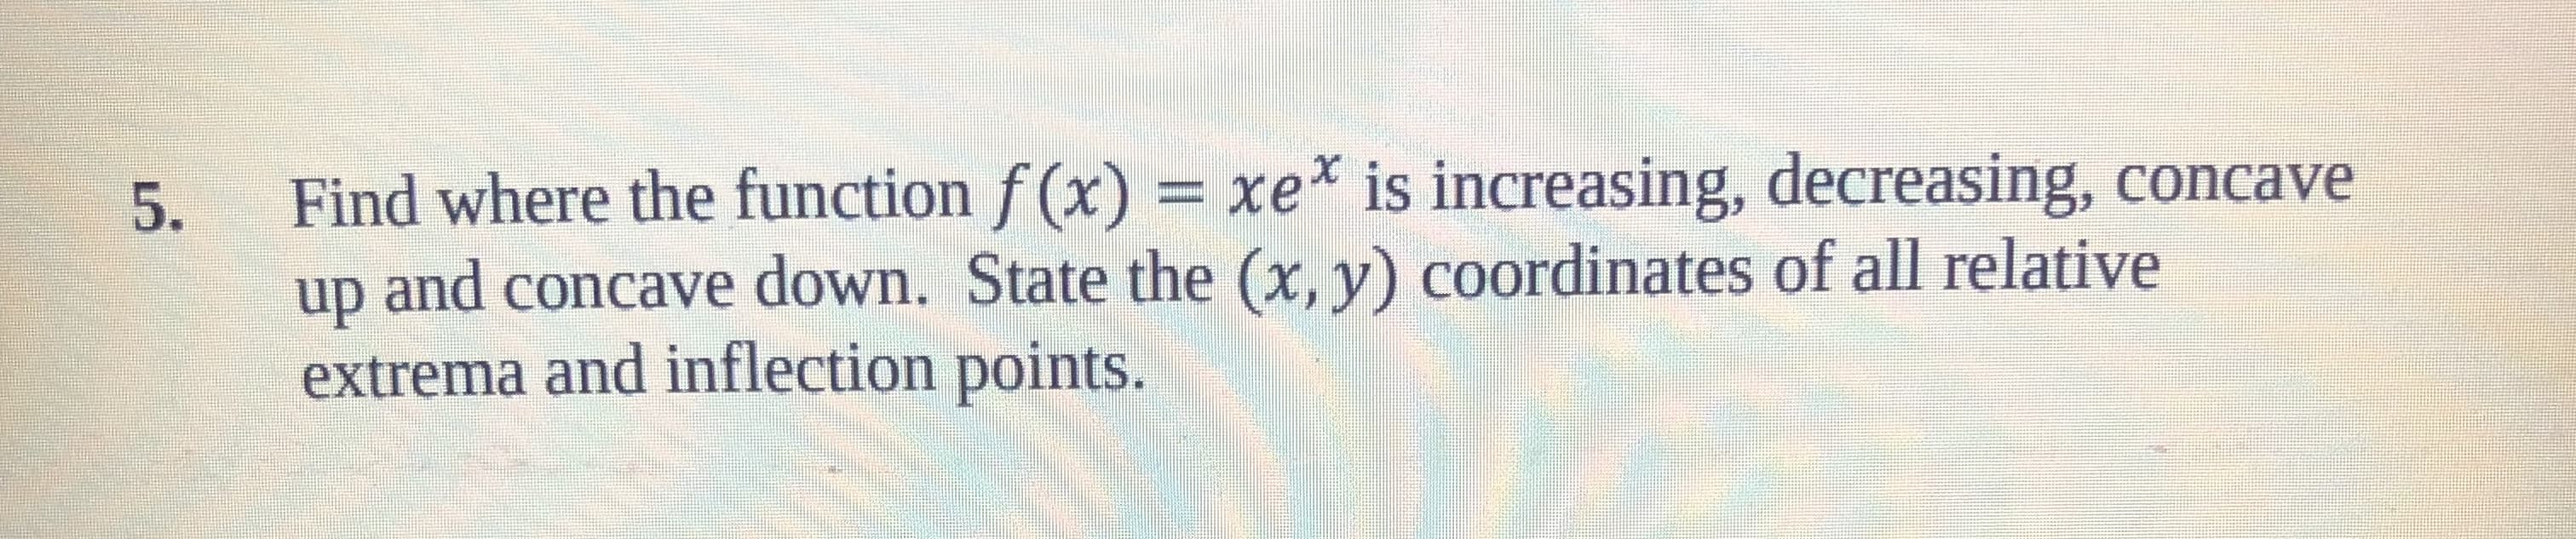 5. Find where the function f (x) xe is increasing, decreasing, concave
up and concave down. State the (x, y) coordinates of all relative
extrema and inflection points.
